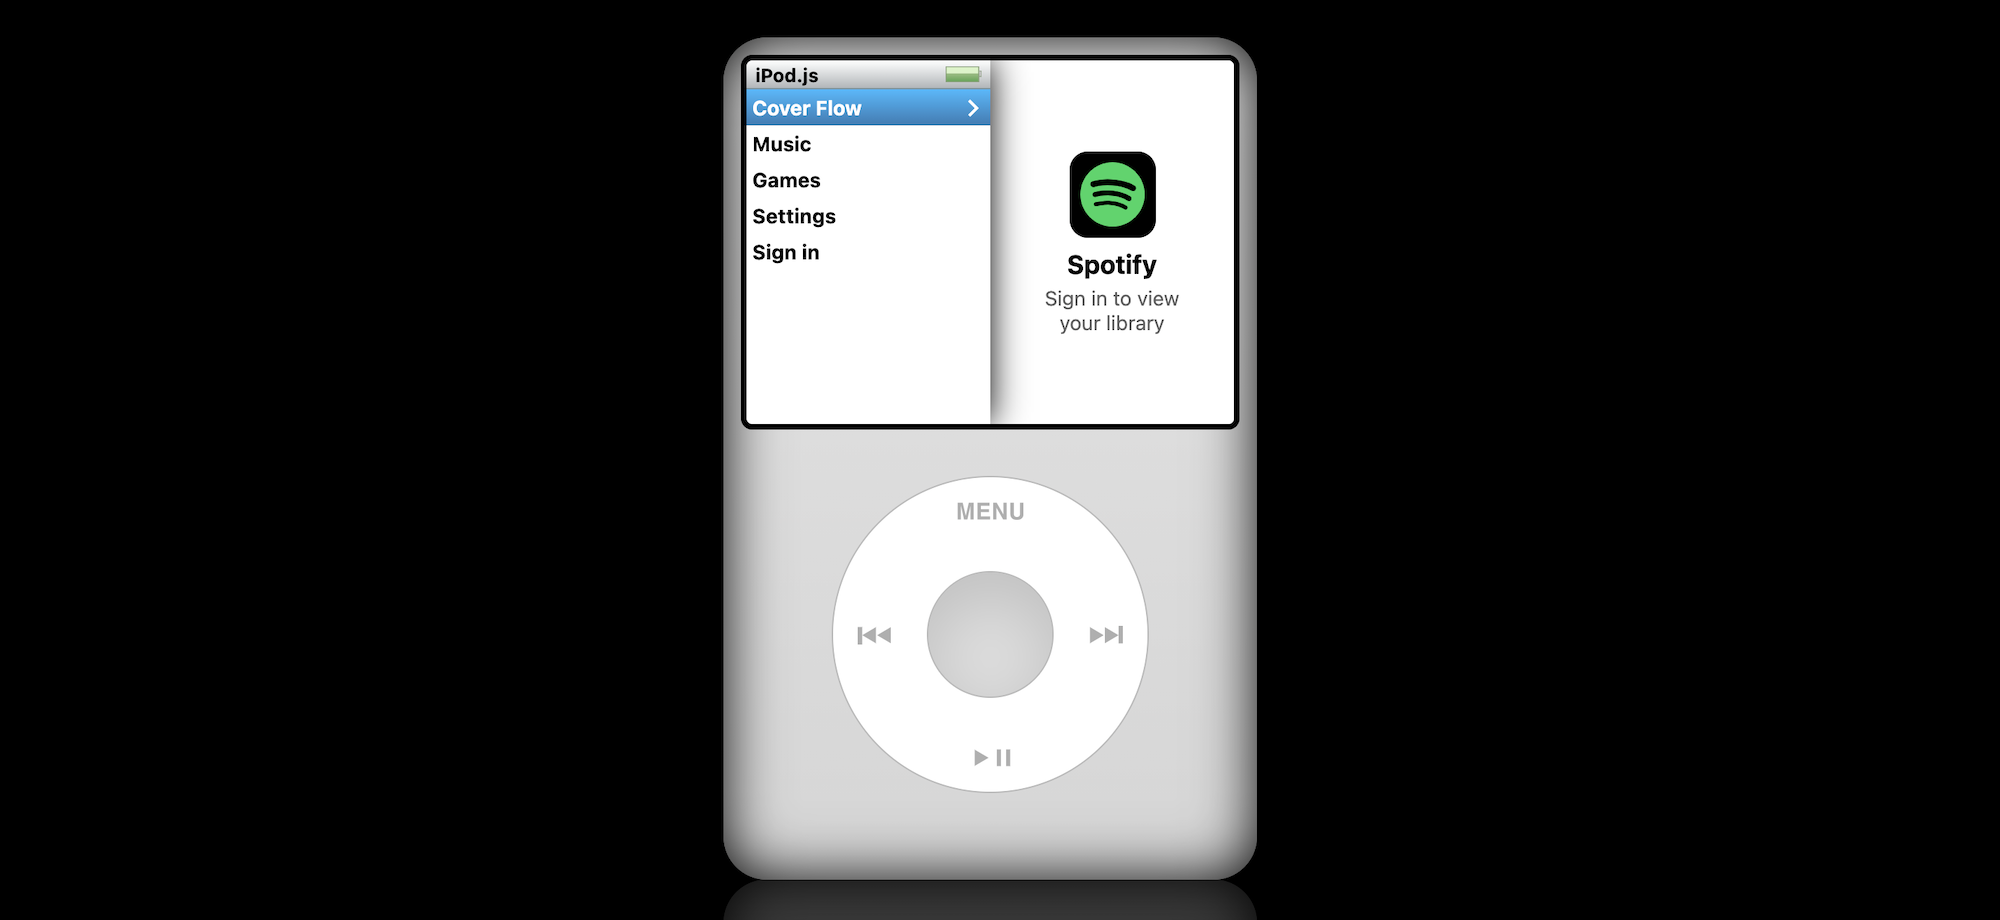 for ipod download BrowserDownloadsView 1.45